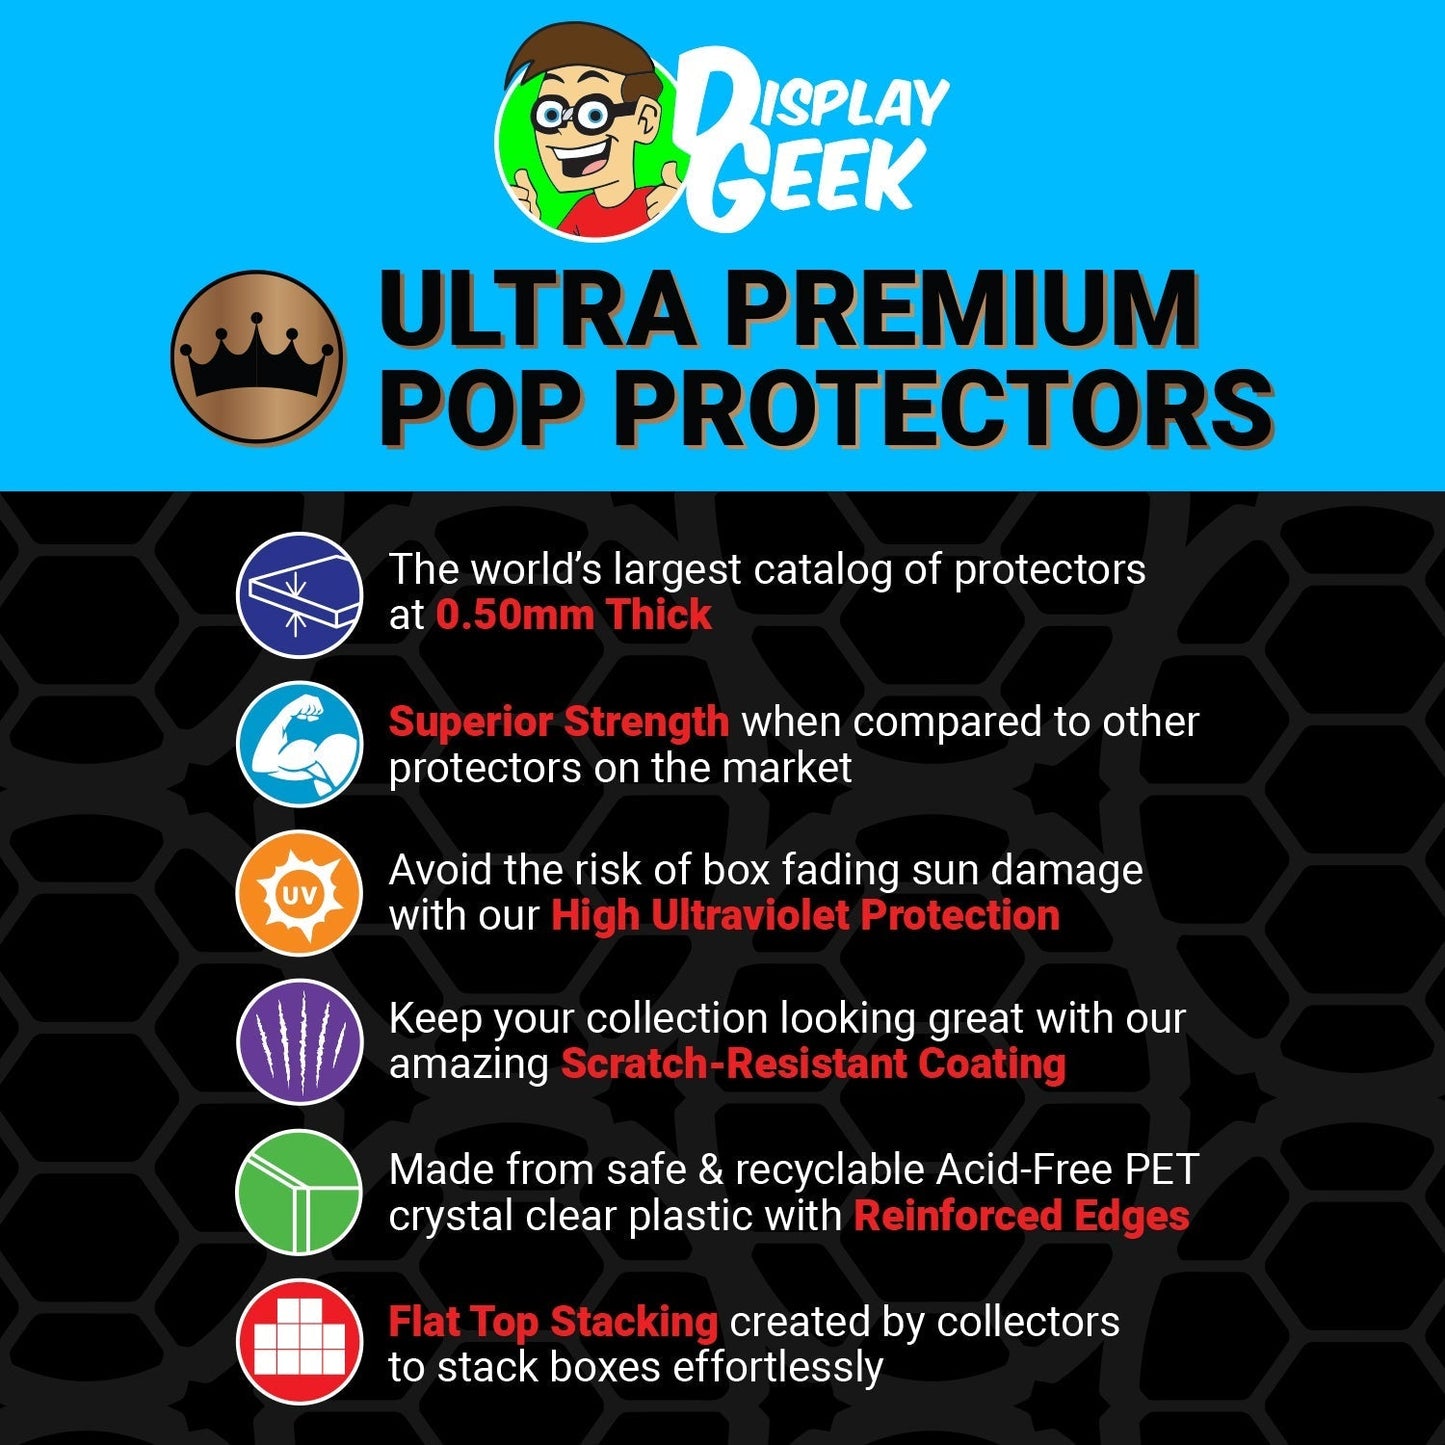 Pop Protector for Deadpool #46 Funko Pop Comic Covers - PPG Pop Protector Guide Search Created by Display Geek